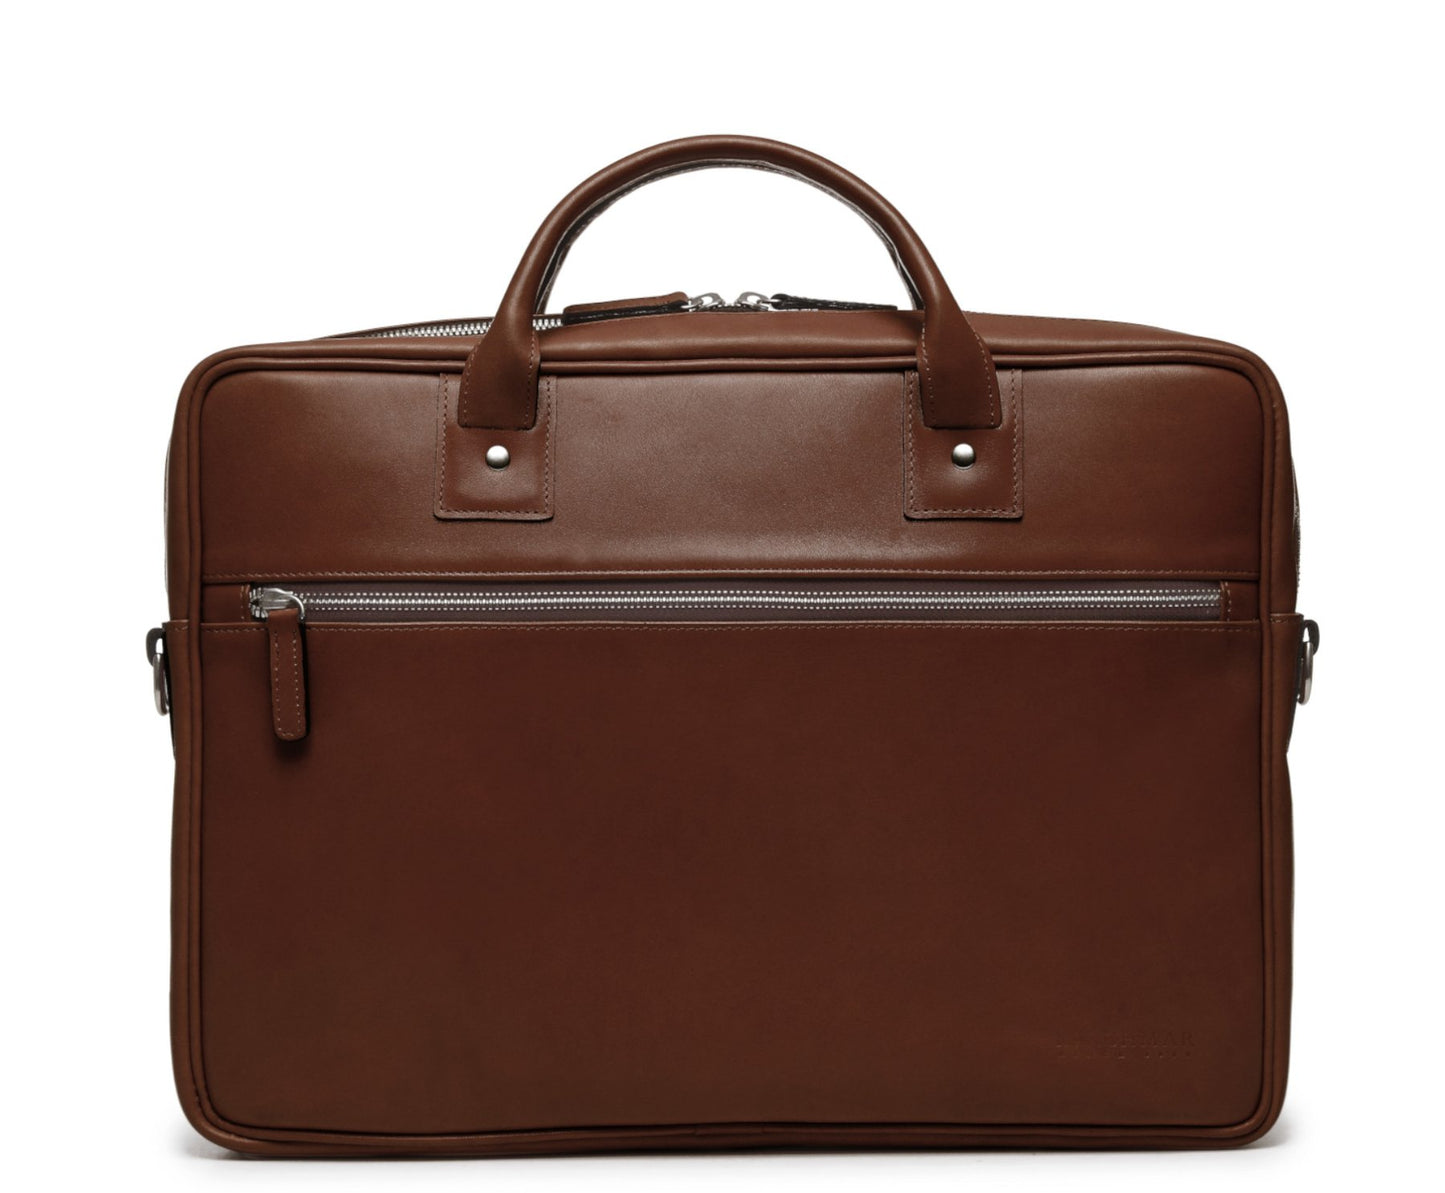 DYLAN Leather 15" Brief Bag | Grain Leather | Made in USA | Korchmar | Brown Leather with Nickel Fittings